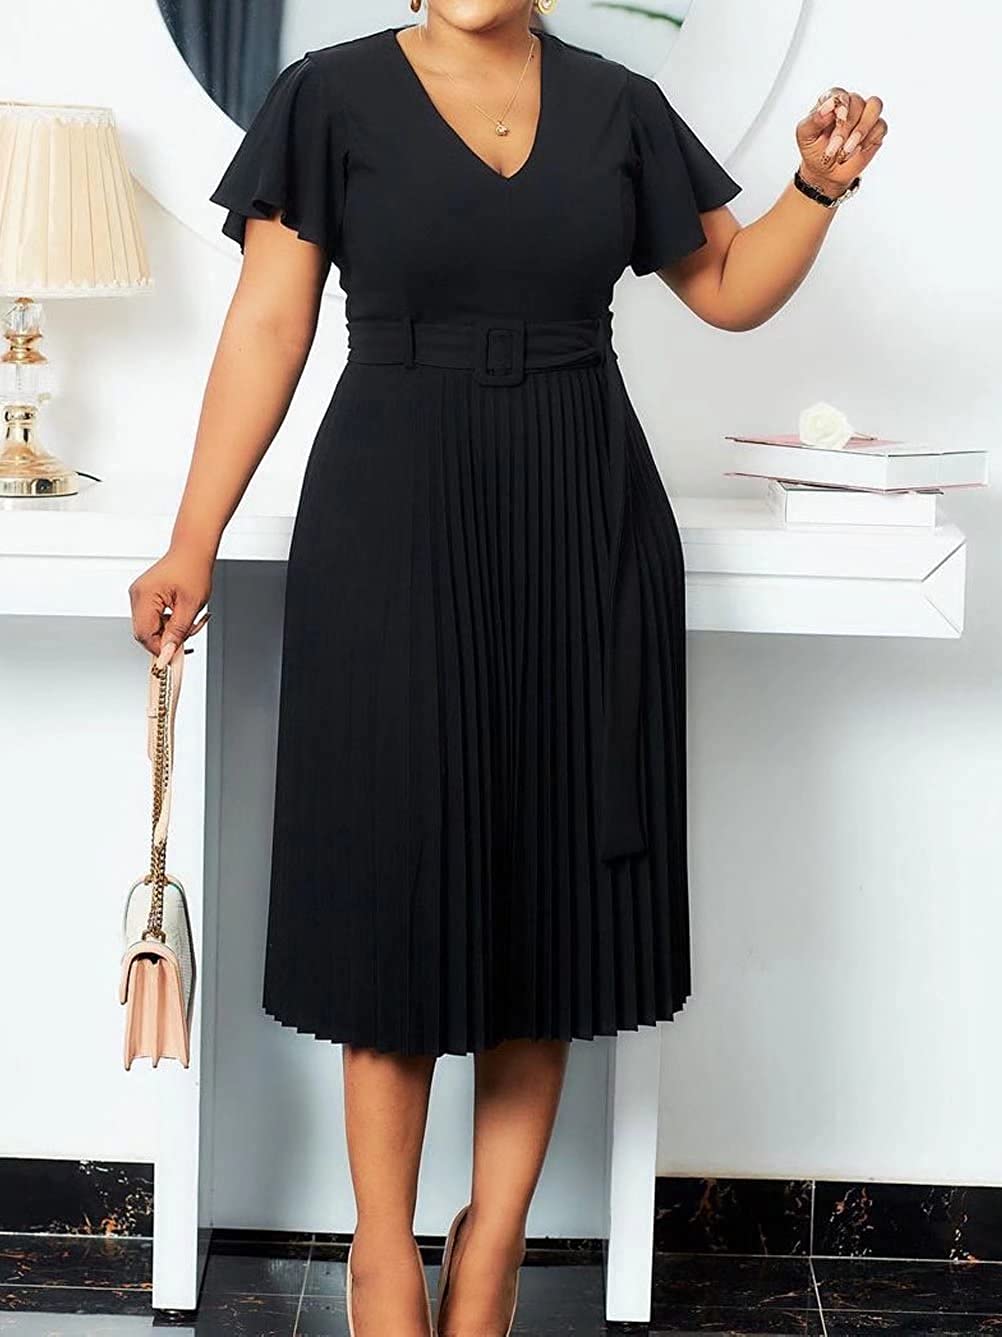 Women's Elegant Wear to Work Belted Pleated Flared Short Sleeve V Neck Casual Midi Dress for Cocktail Party